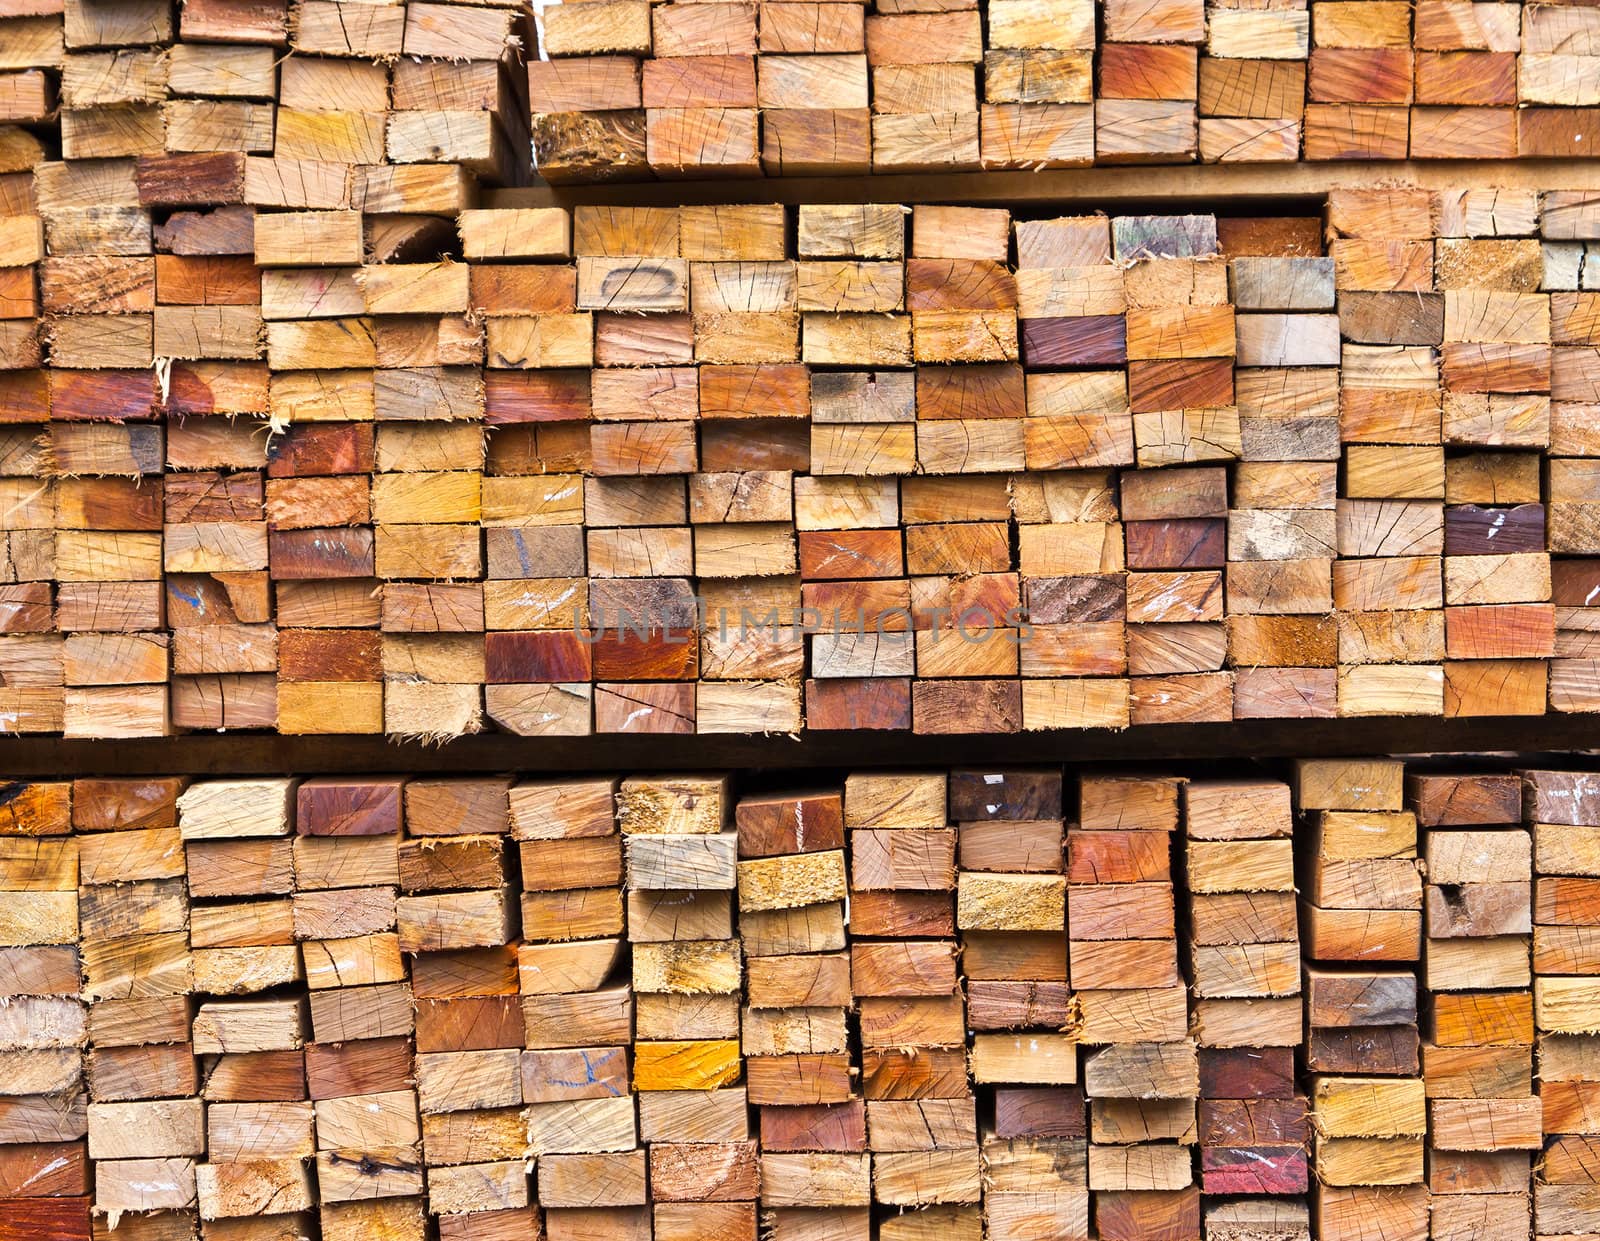 stack of wood logs for background